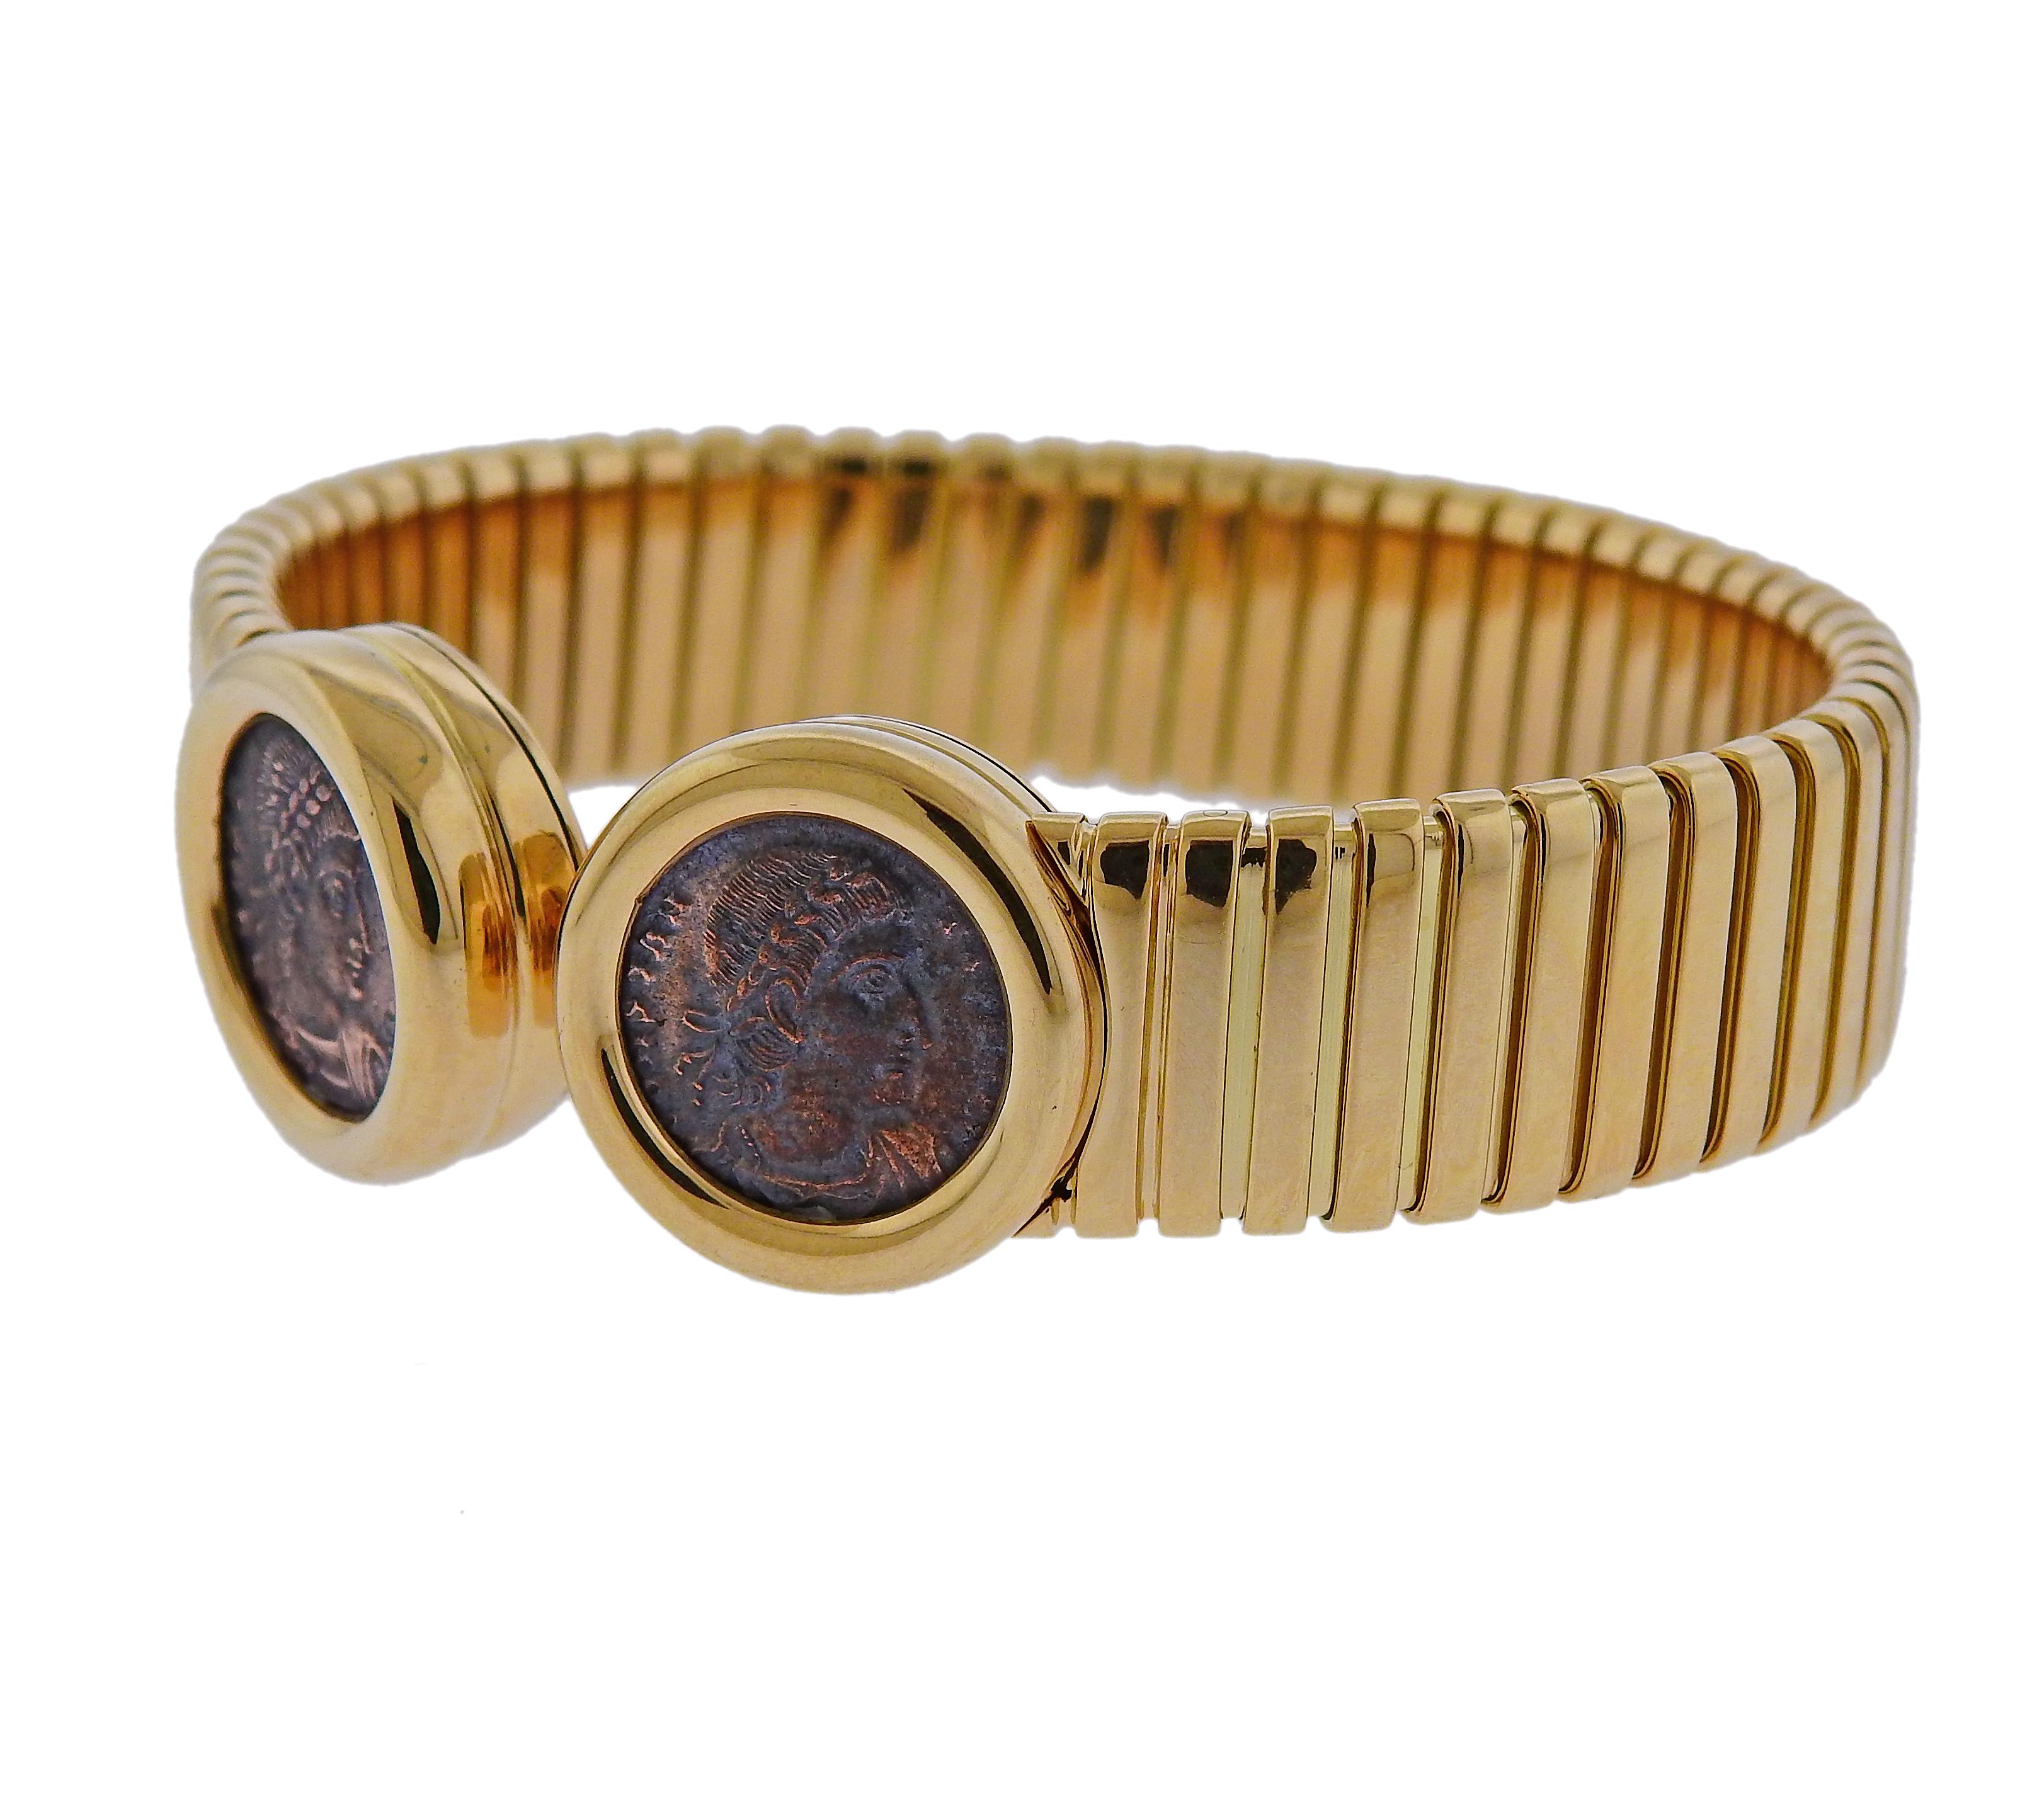 Iconic 18k yellow gold cuff bracelet, crafted by Bvlgari for Monete collection, set with two ancient coins. Bracelet will fit up to 7.5